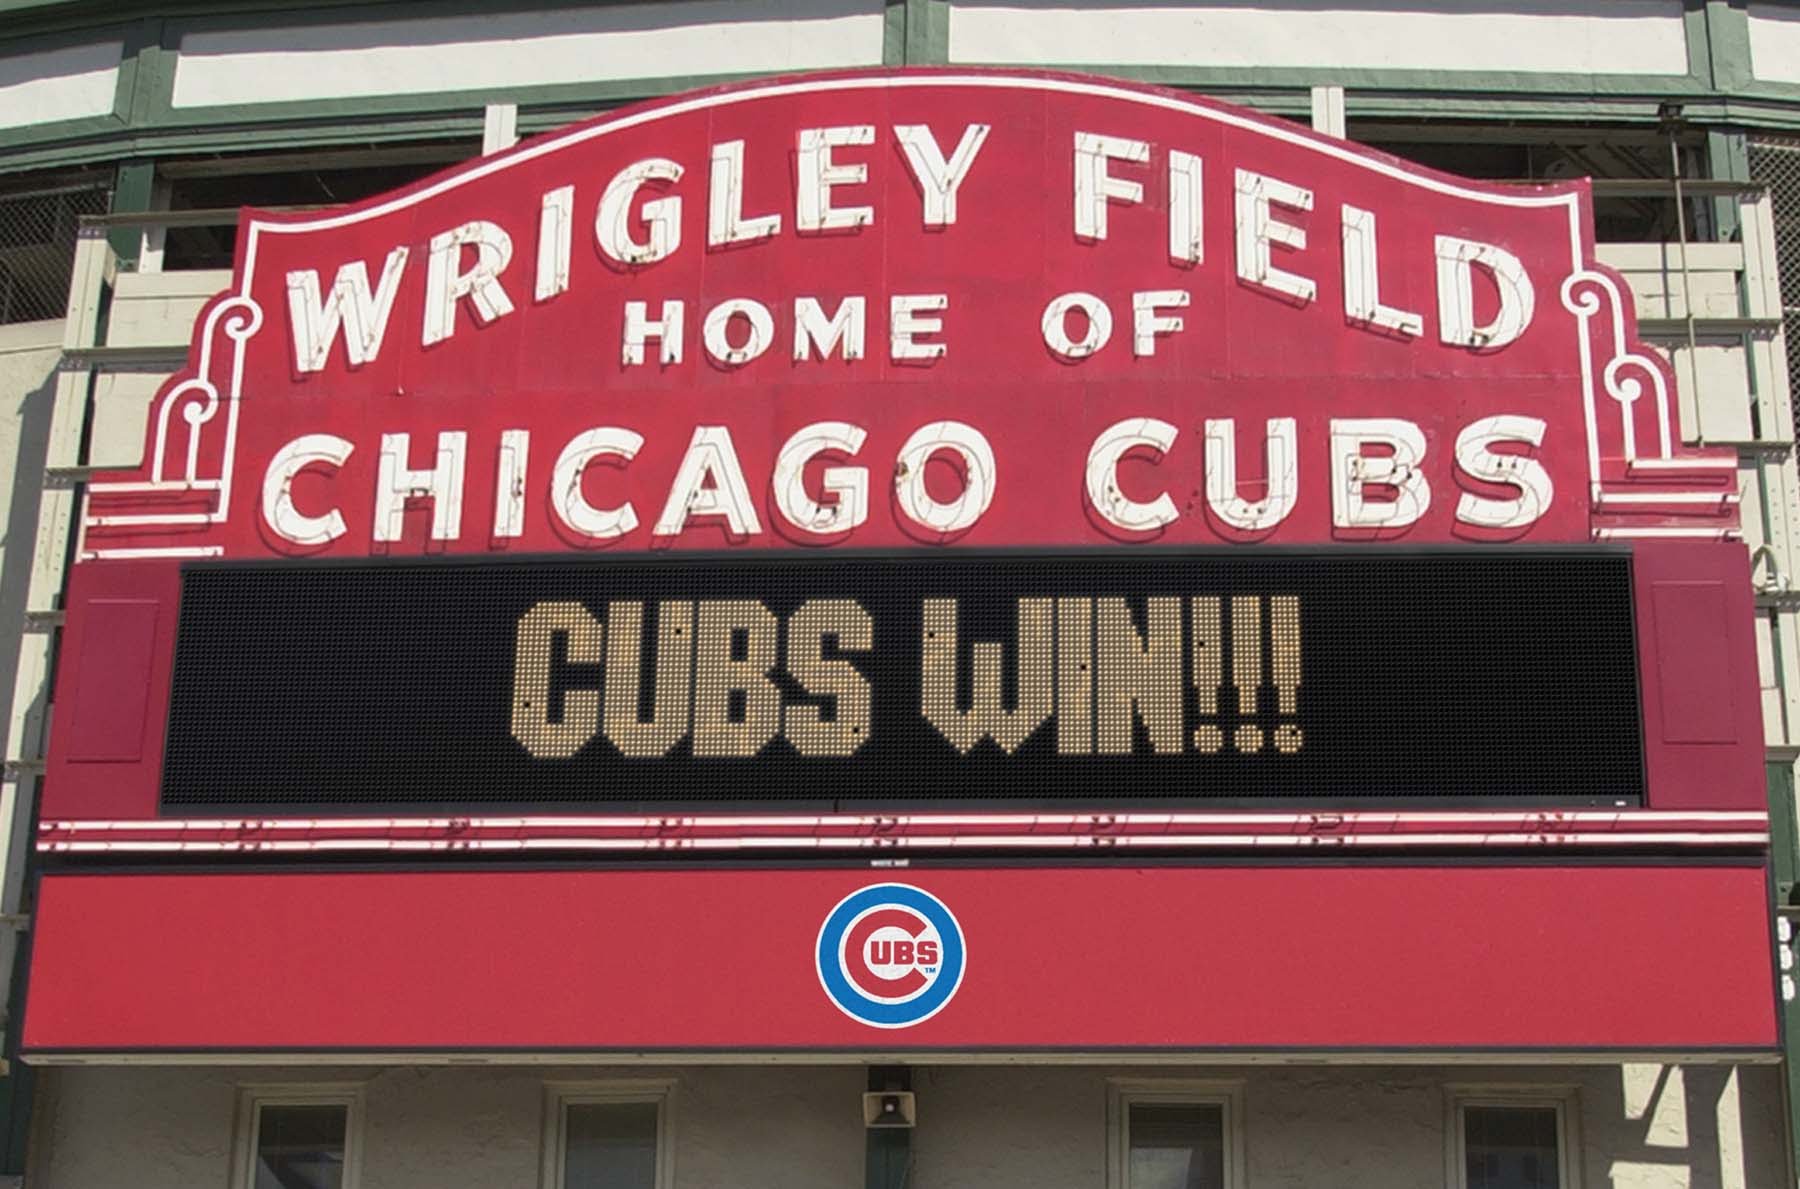 Breaking News Audio! Cubs Win! Cubs Win!